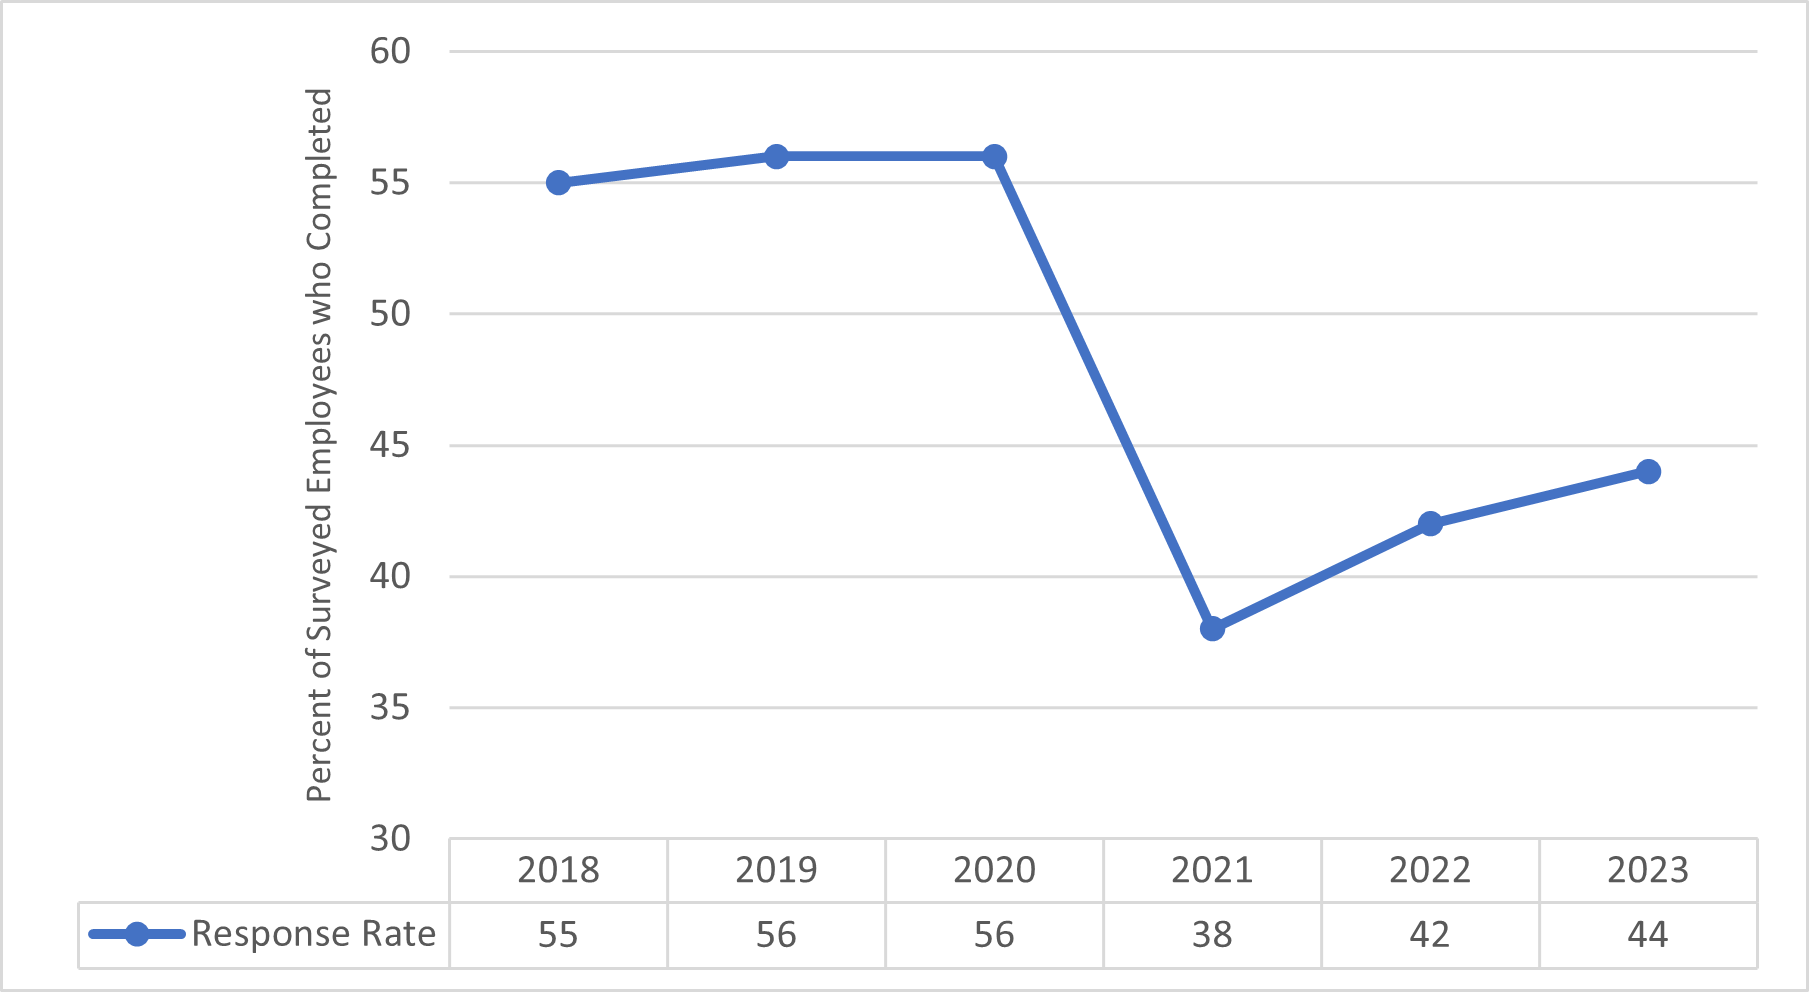 Graph 2 depicts a line graph of the Treasury response rate – number of employees who completed a survey compared to number of employees invited to the survey - to the Federal Employee Viewpoint Survey over the last six years. The results from 2018 to 2023 respectively are 55, 56, 56, 38, 42, and 44.